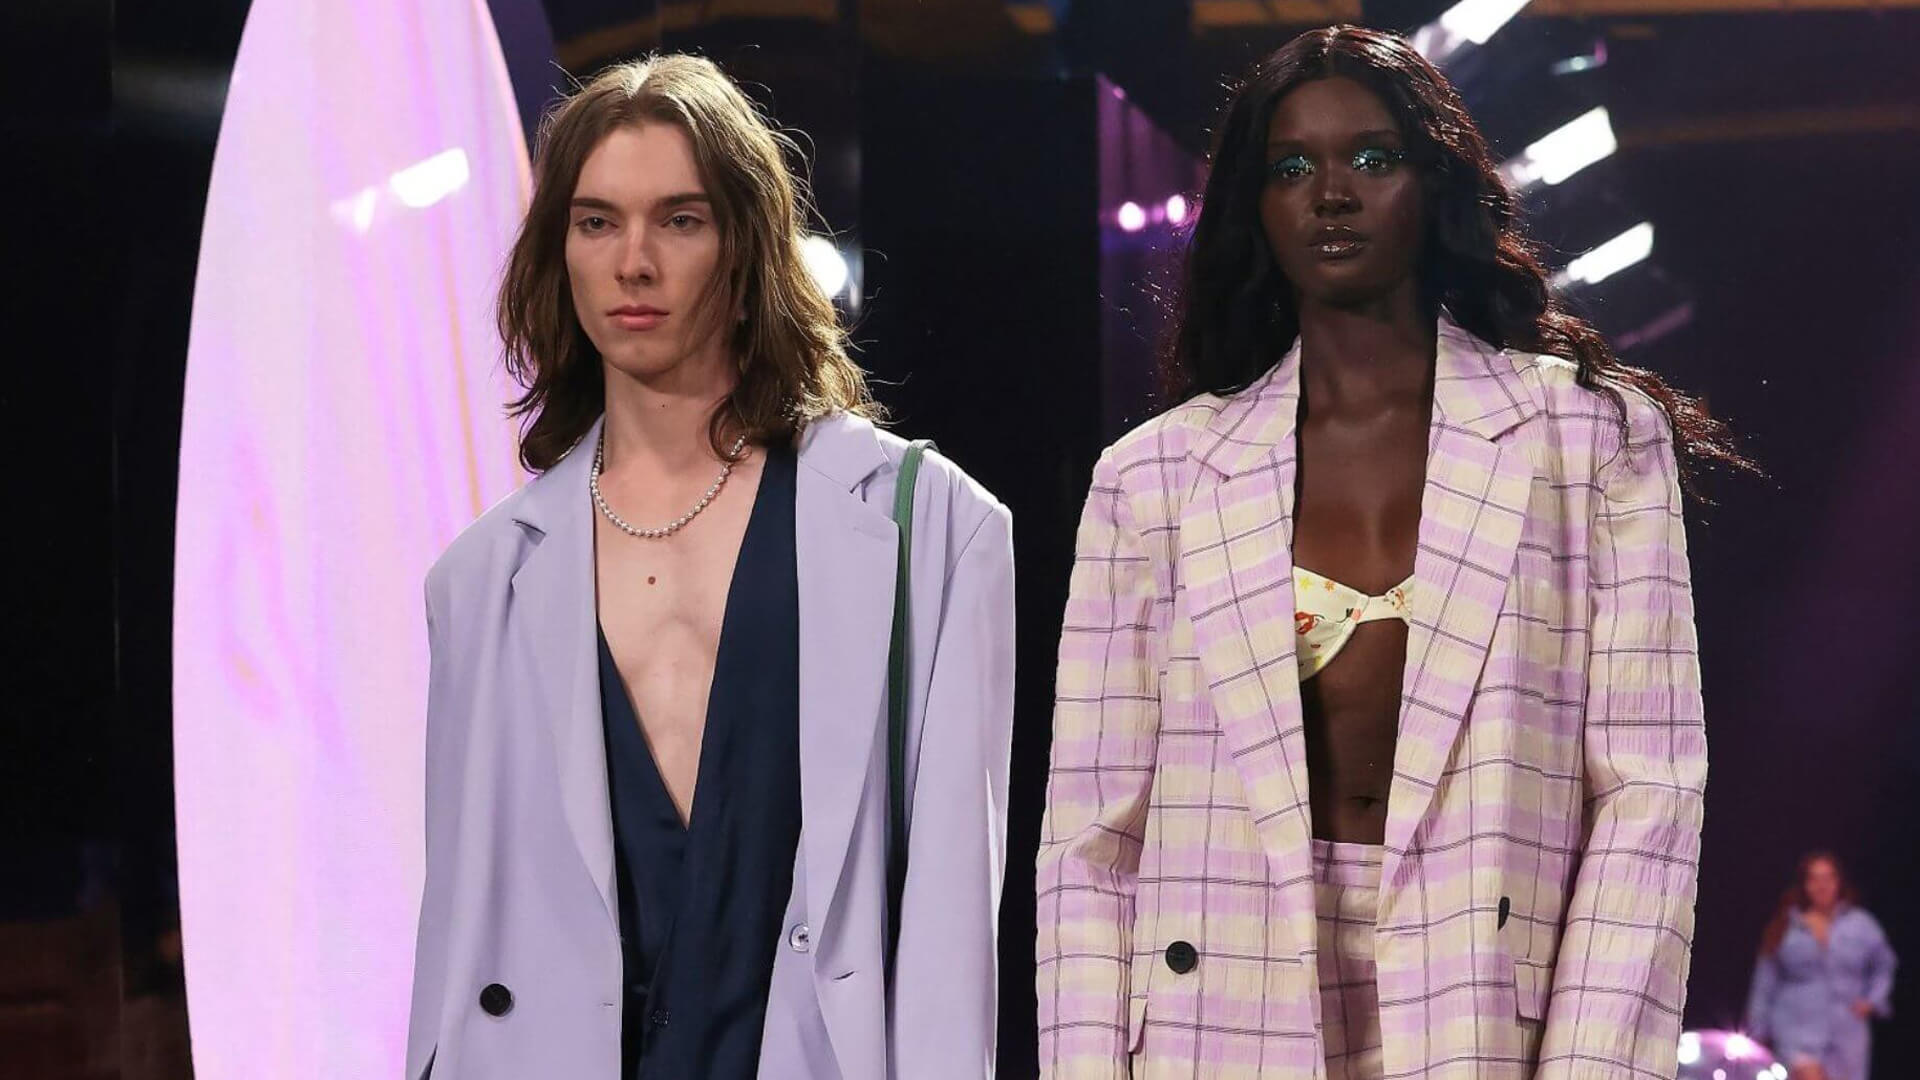 Close-up of male and female models walking on fashion runway for The Iconic RUNWAY X fashion show.